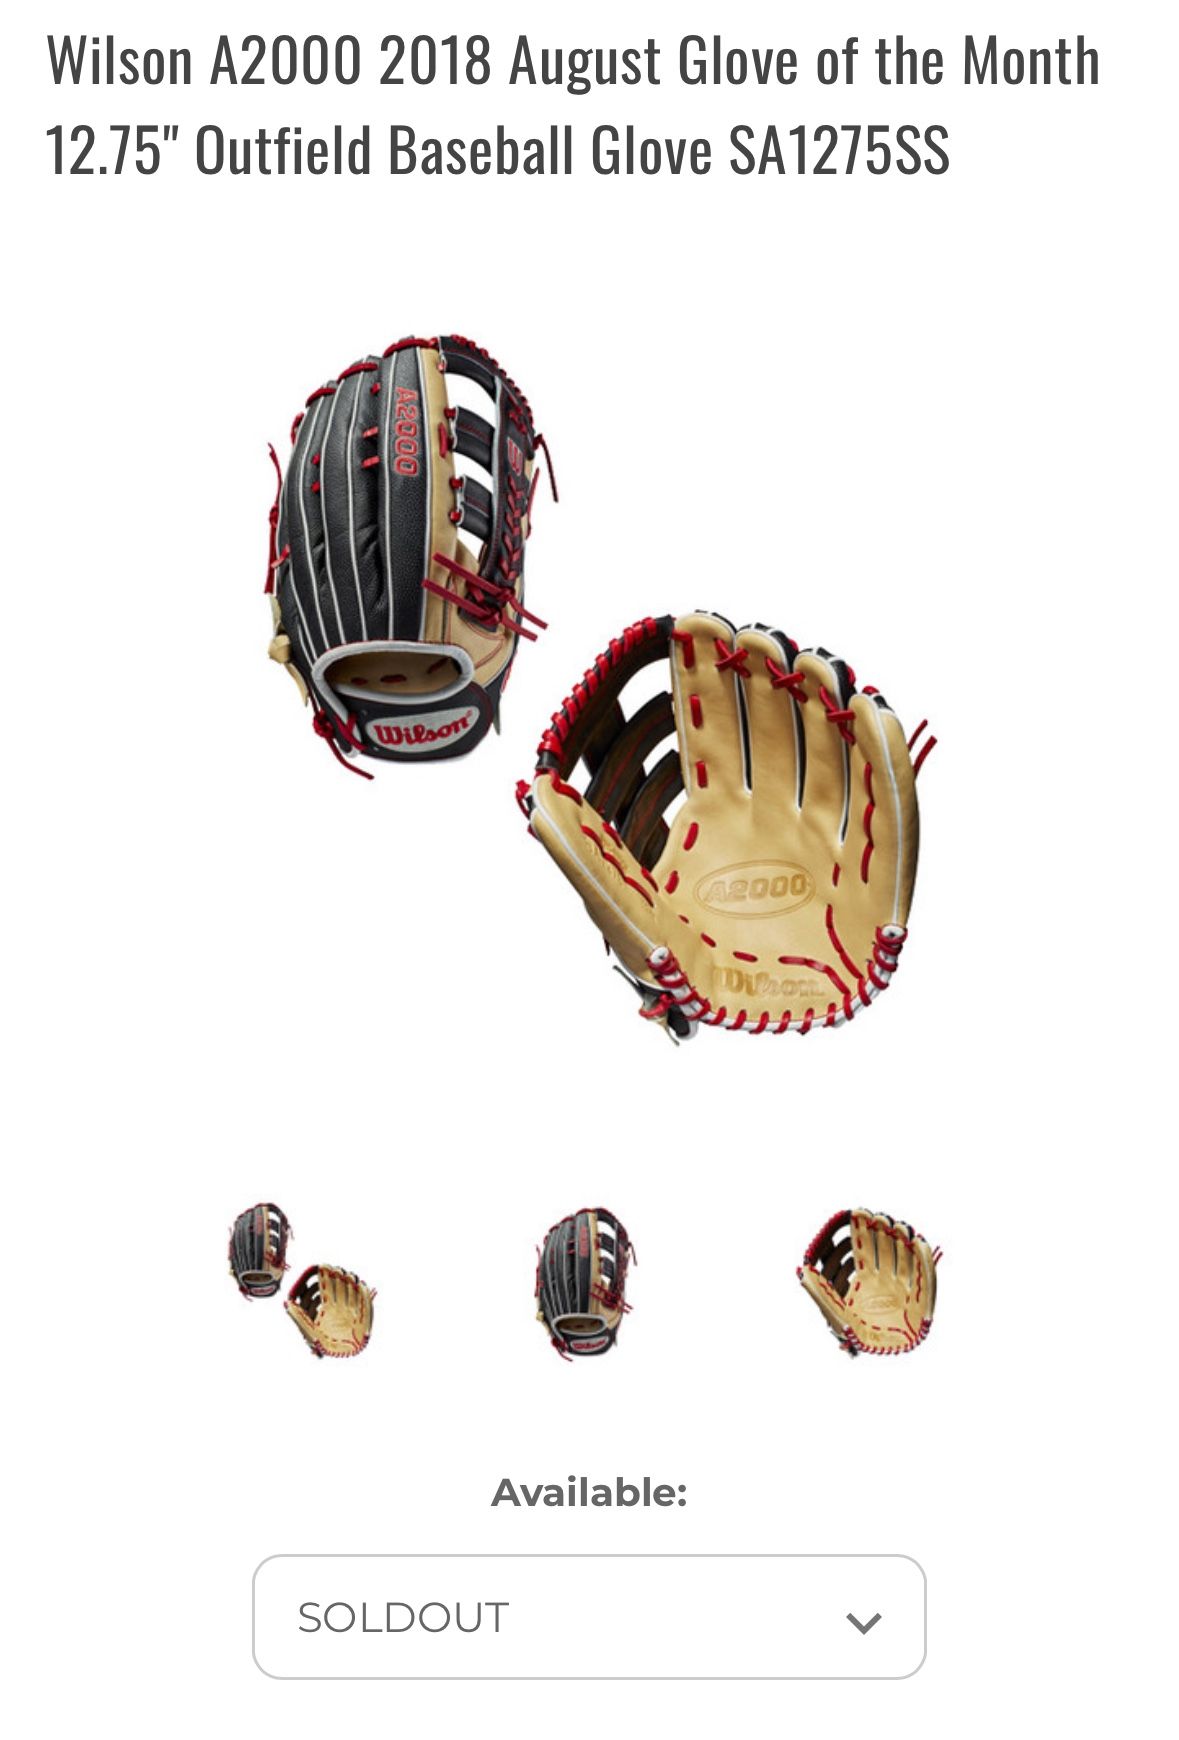 Wilson A2000 2018 August Glove of the Month 12.75" Outfield Baseball Glove SA1275SS